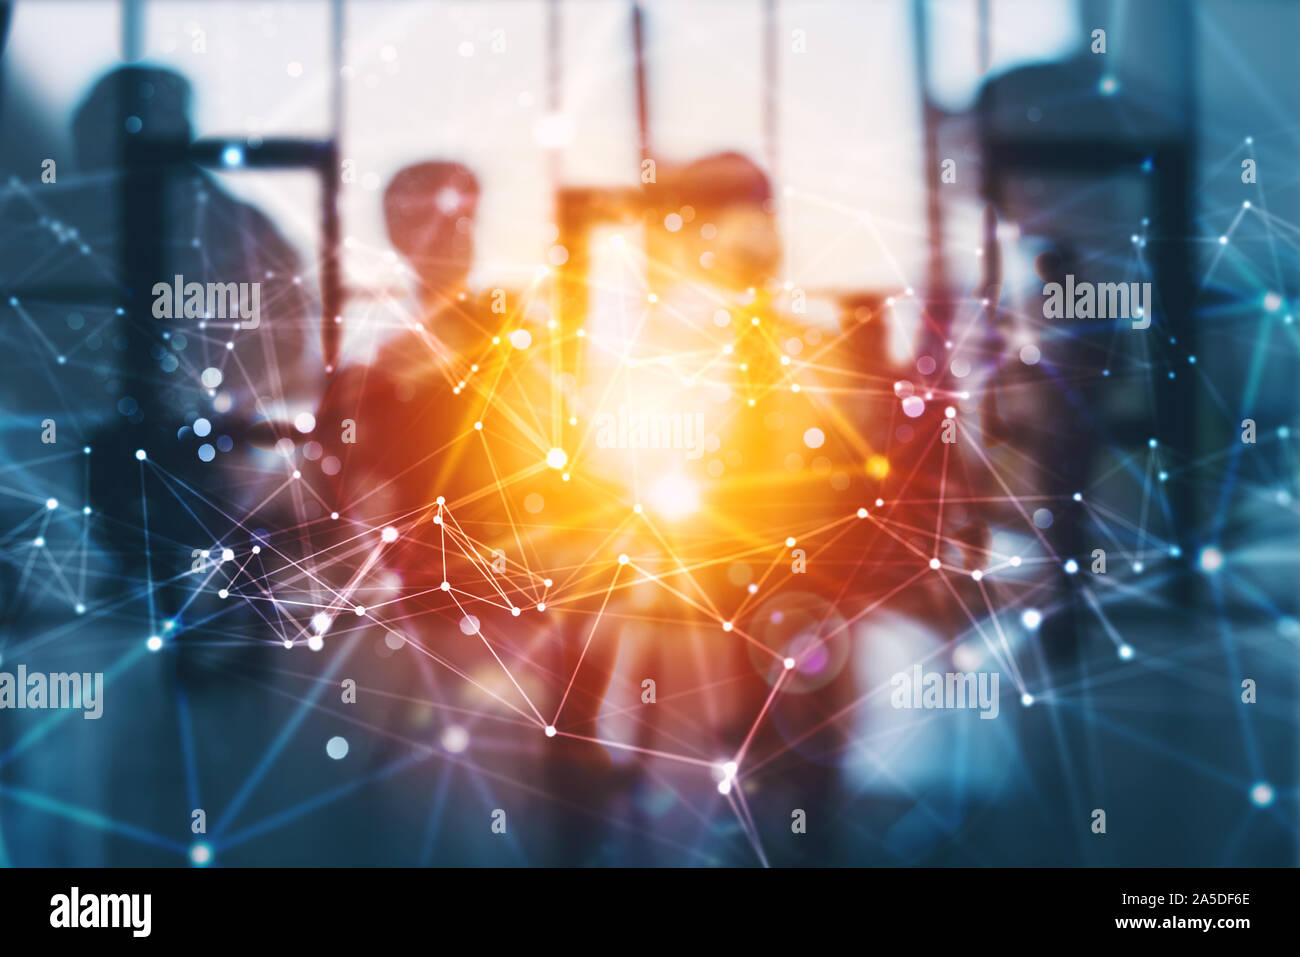 Silhouette of business people work together in office. Concept of teamwork and partnership. double exposure with network effects Stock Photo